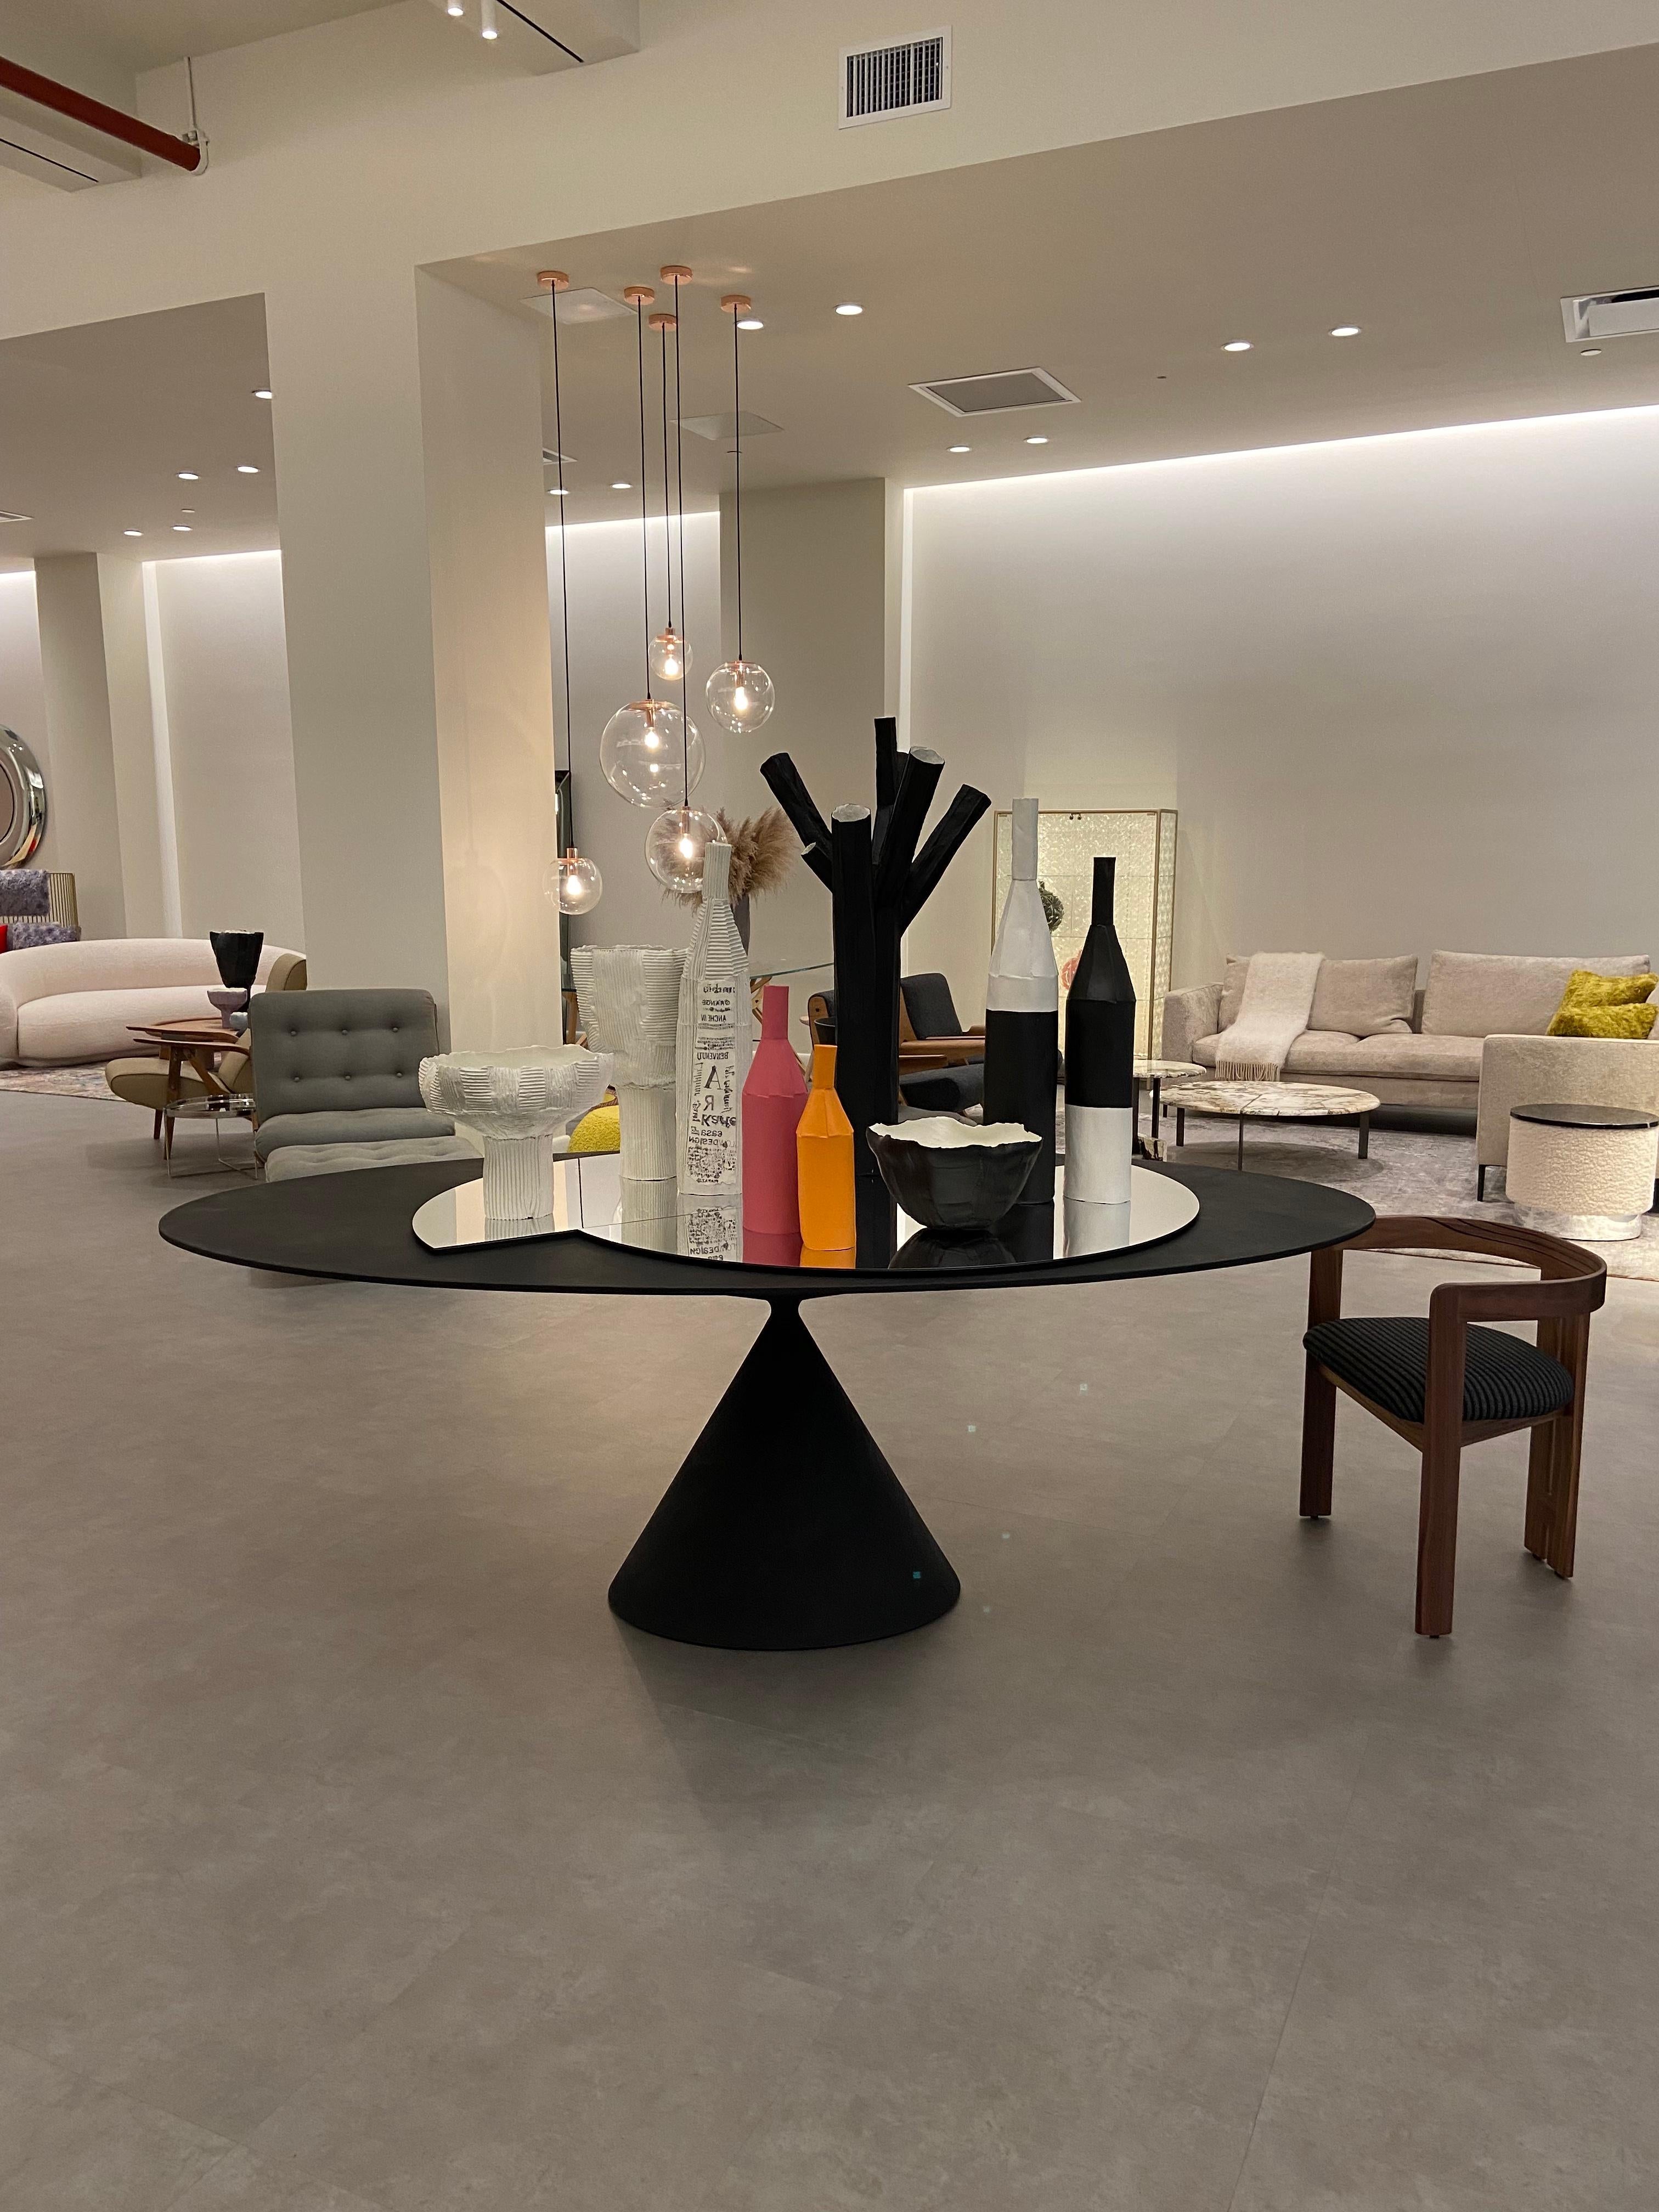 Stock 218 x 120cm oval table in D67 lava stone.
Floor sample
Table with rigid polyurethane base and MDF top, completely covered with hand-spread paste. Table height 75,5 cm.

More than a table, a sculpture, a perfect union of beauty and